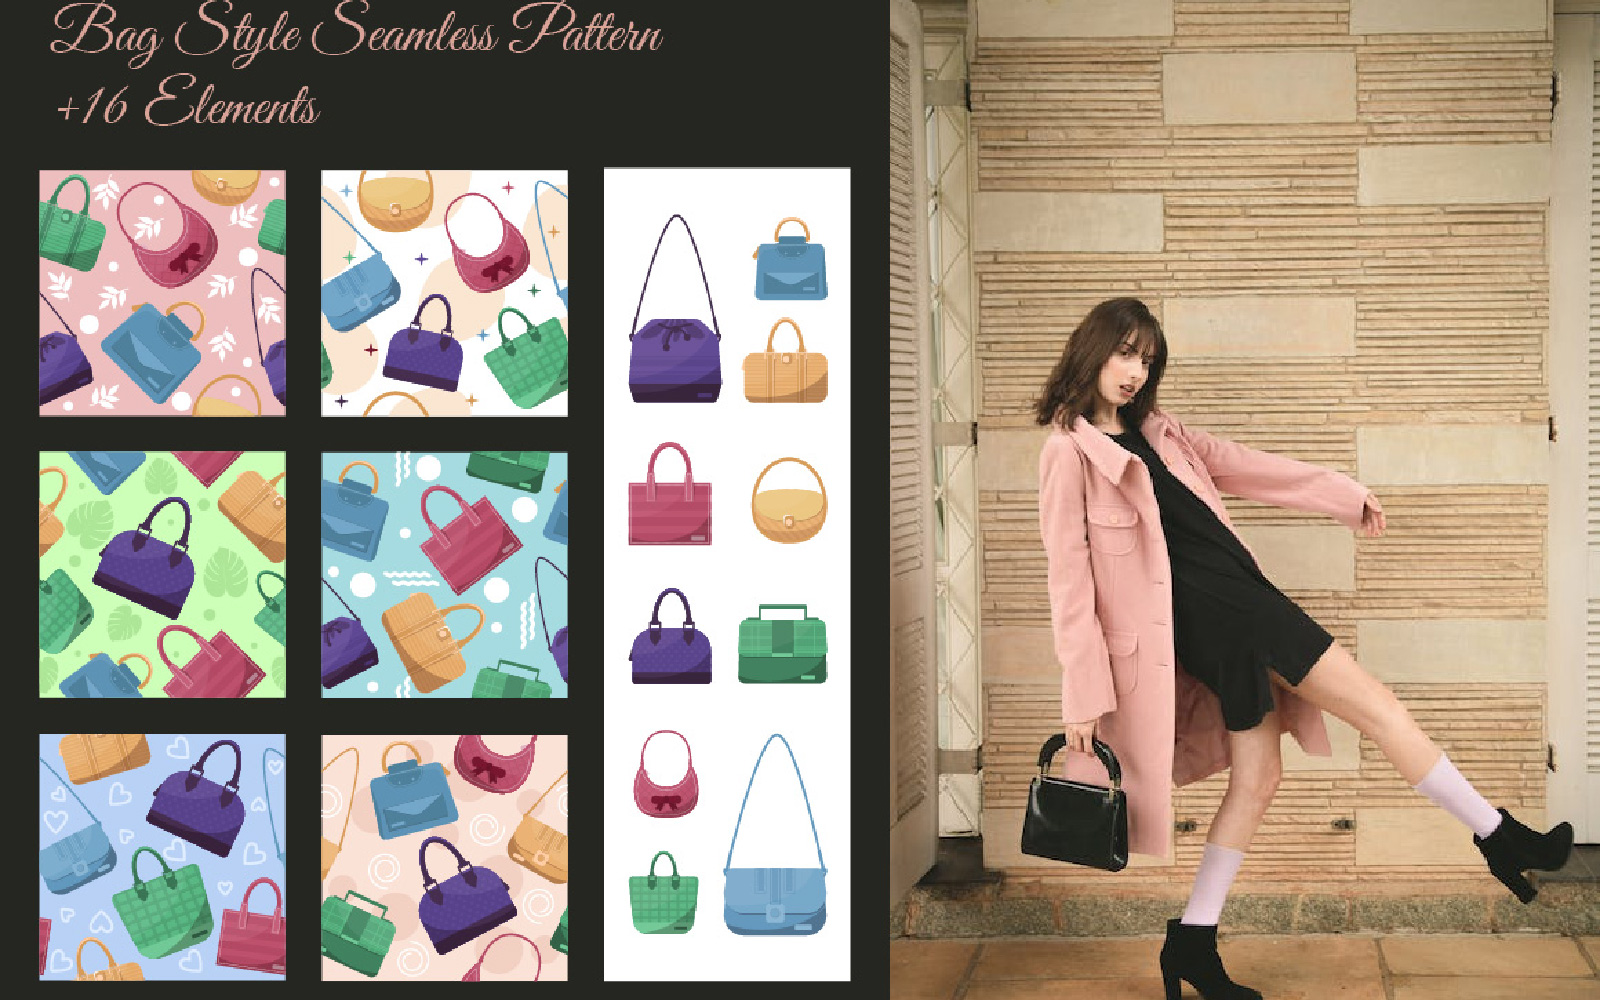 Bag Style Seamless Pattern +16 Elements